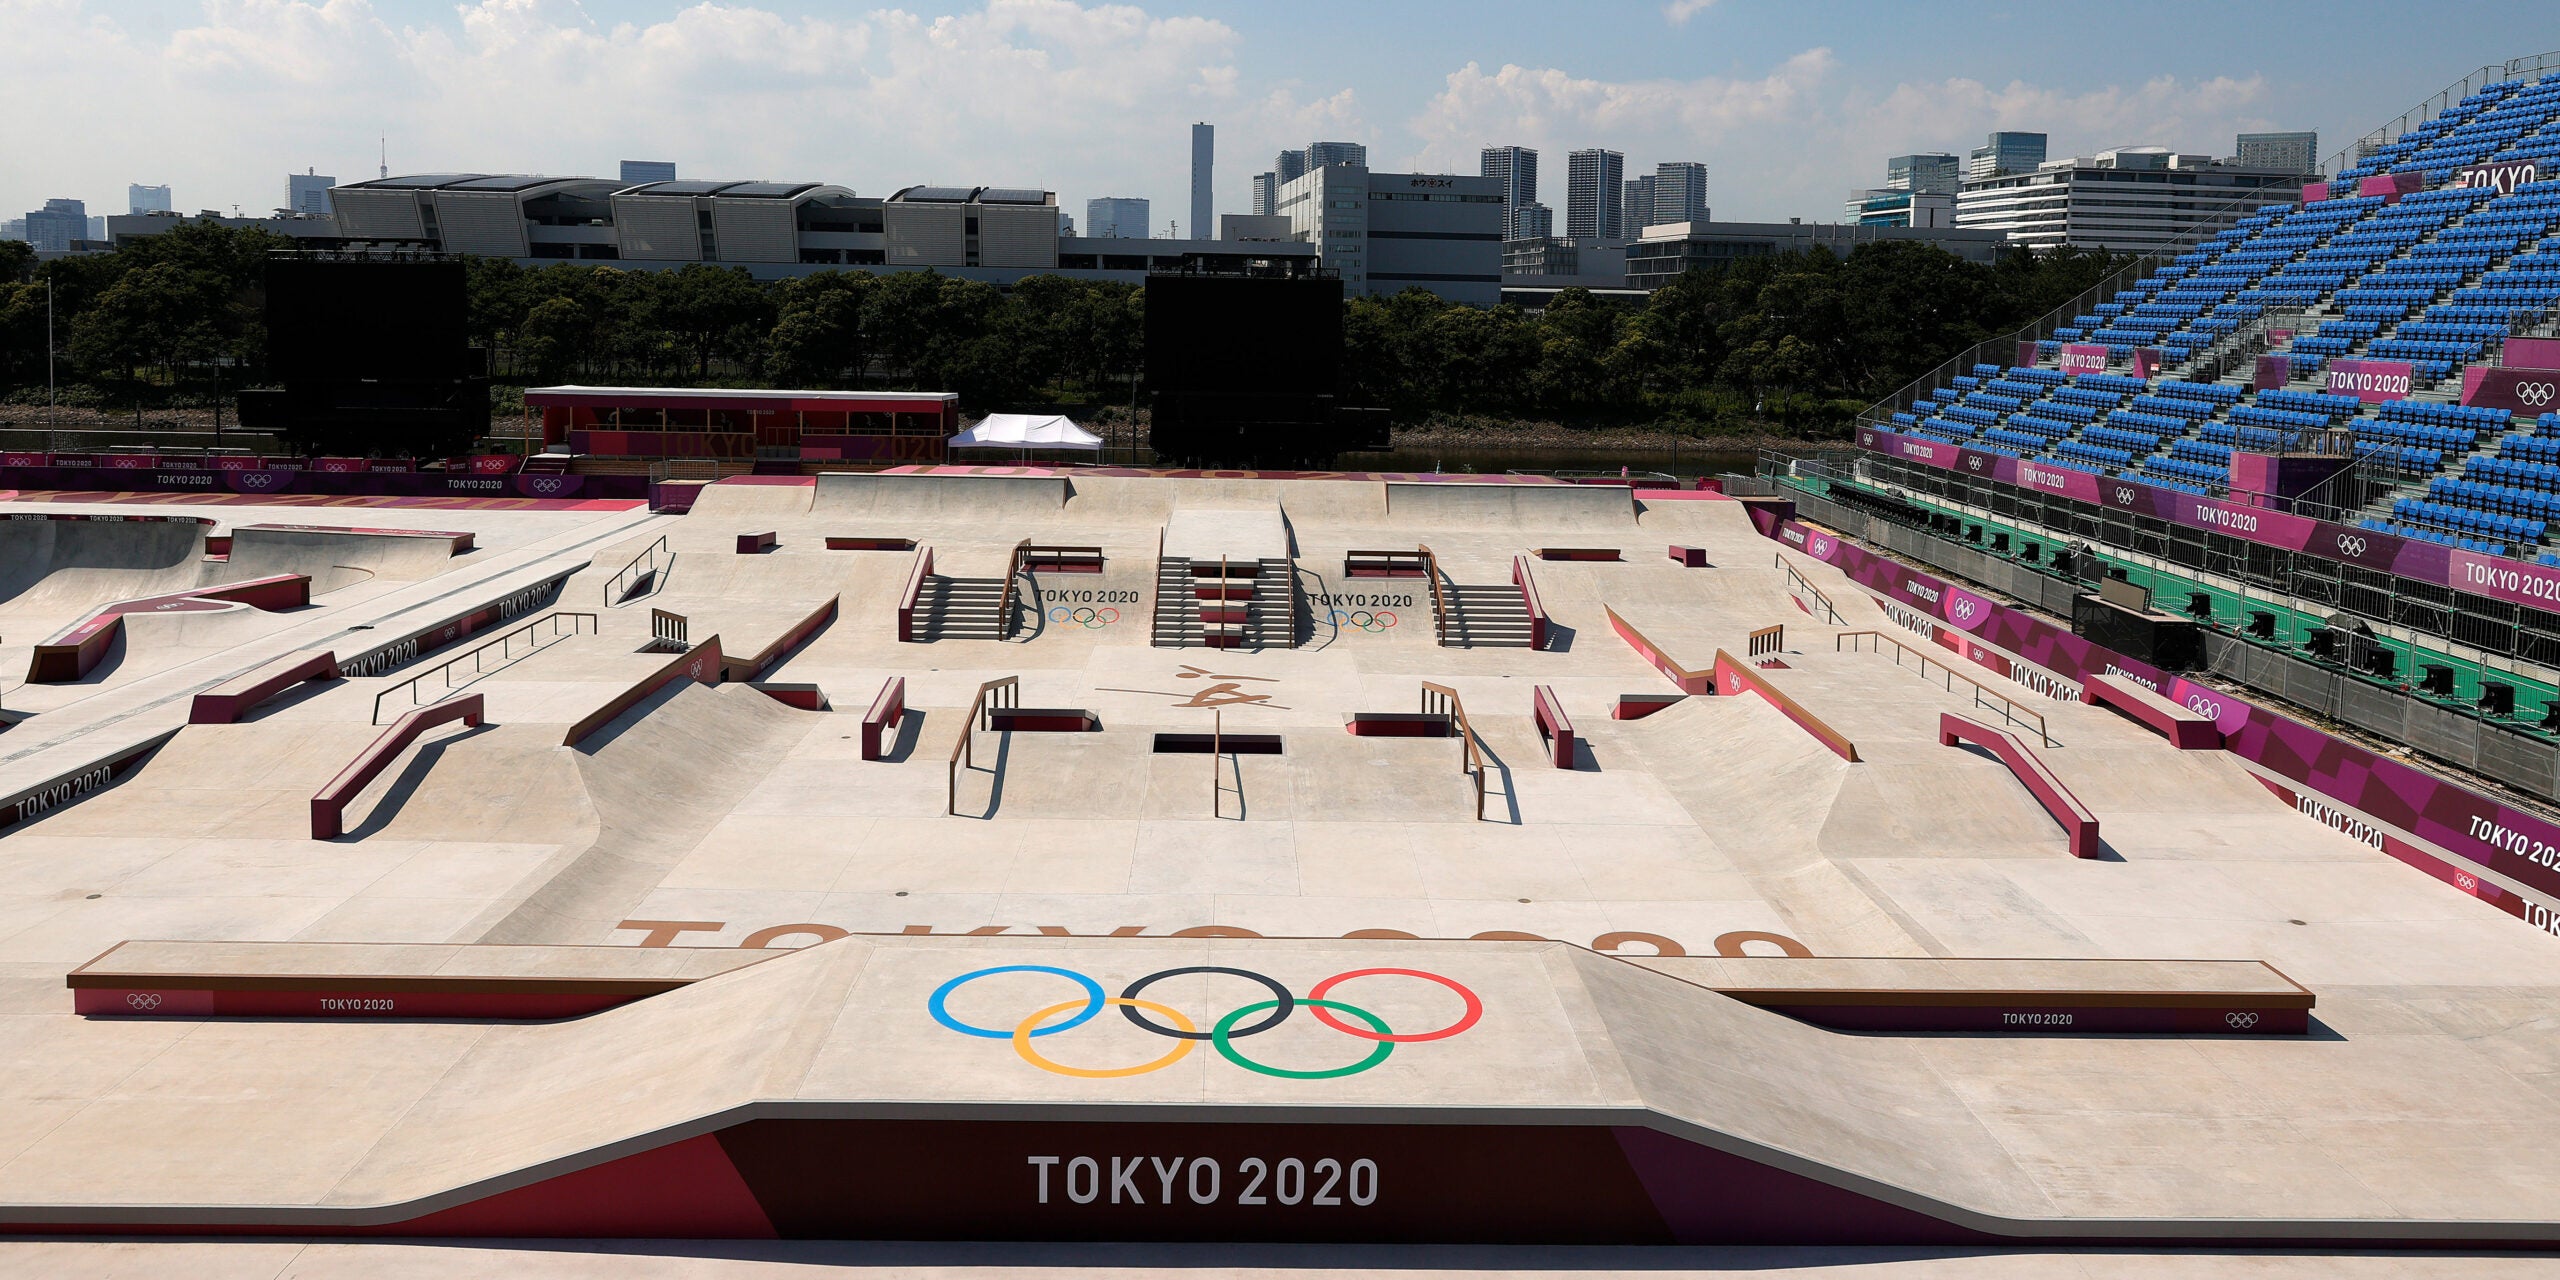 Everything you need to know about Skateboarding in the Olympics